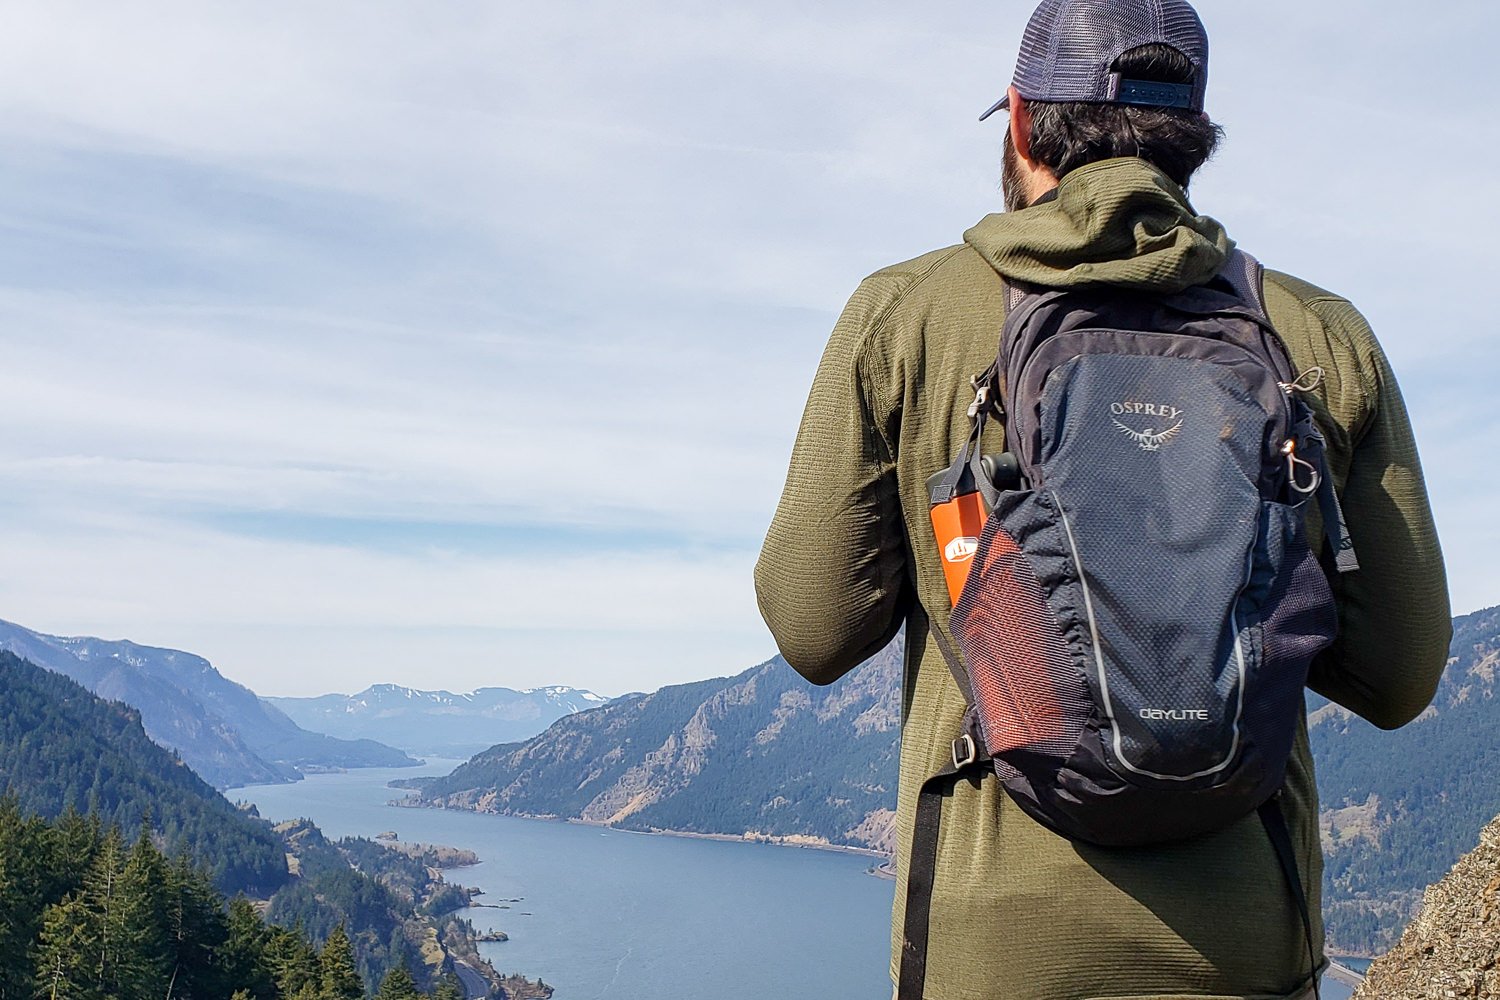 A hiker wearing the Osprey Daylite backpack on a day hike